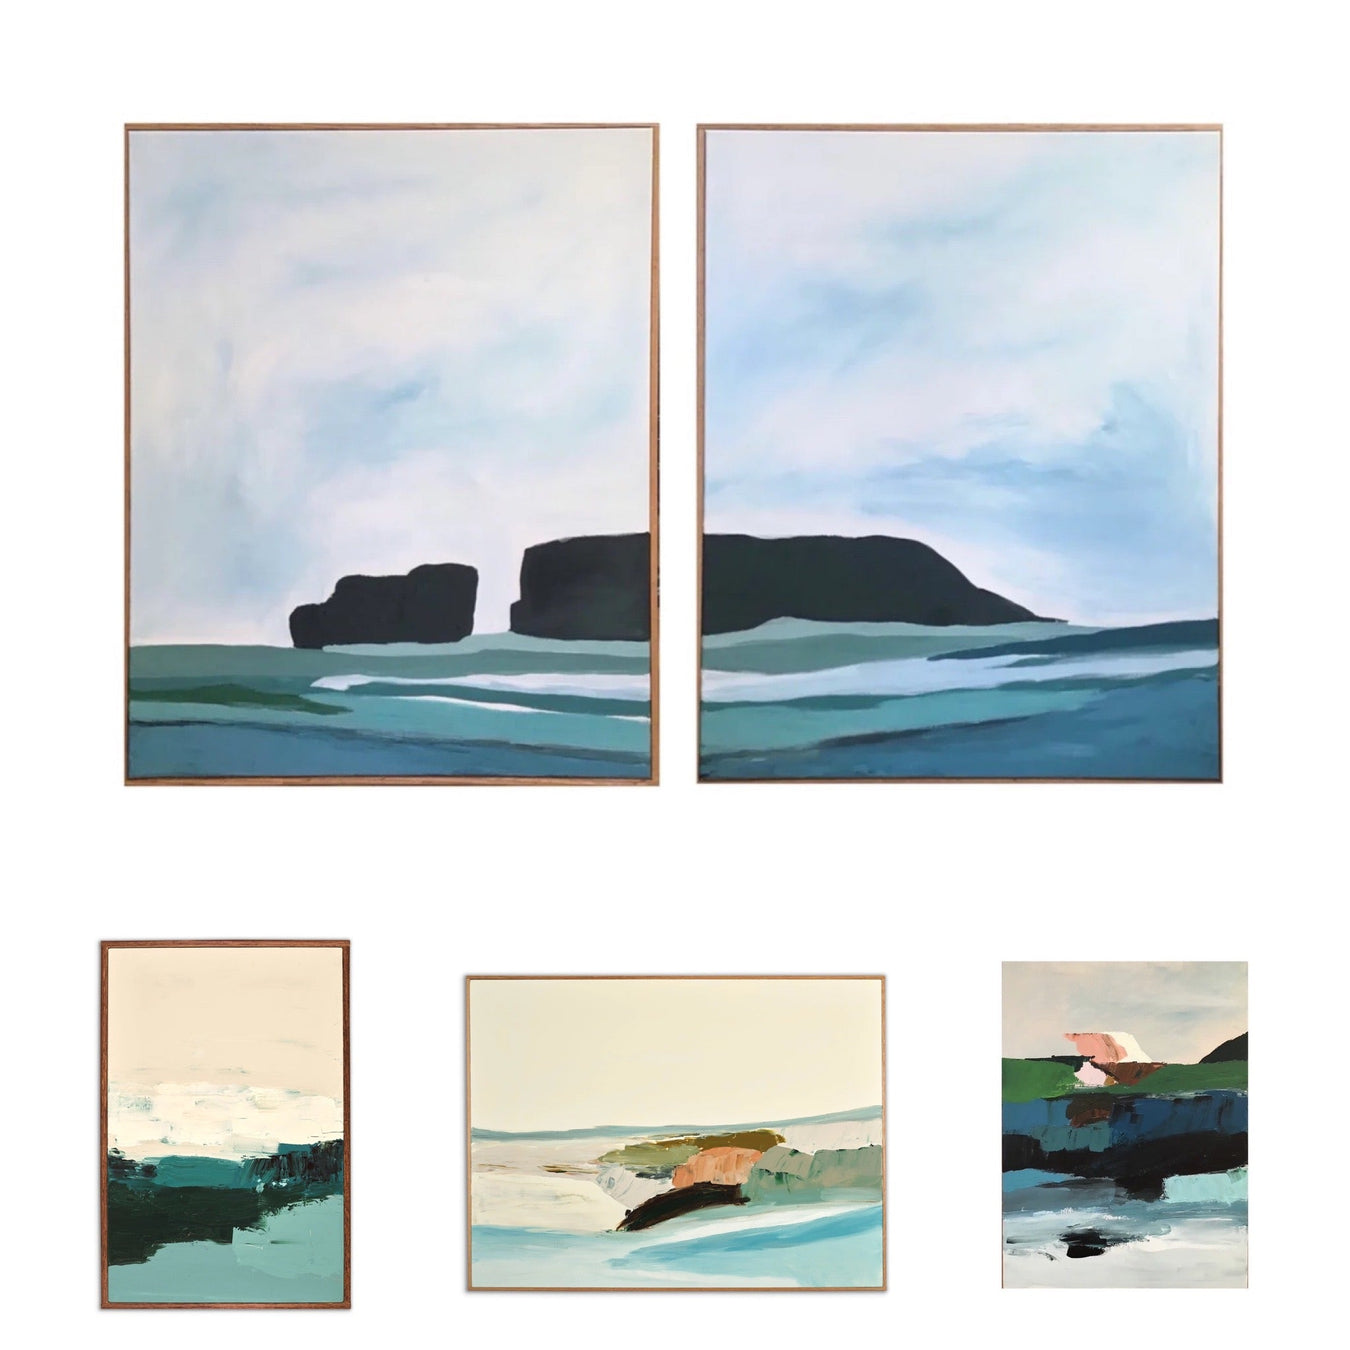 House of Boys paintings by Caryn Owen featuring abstract ocean landscapes